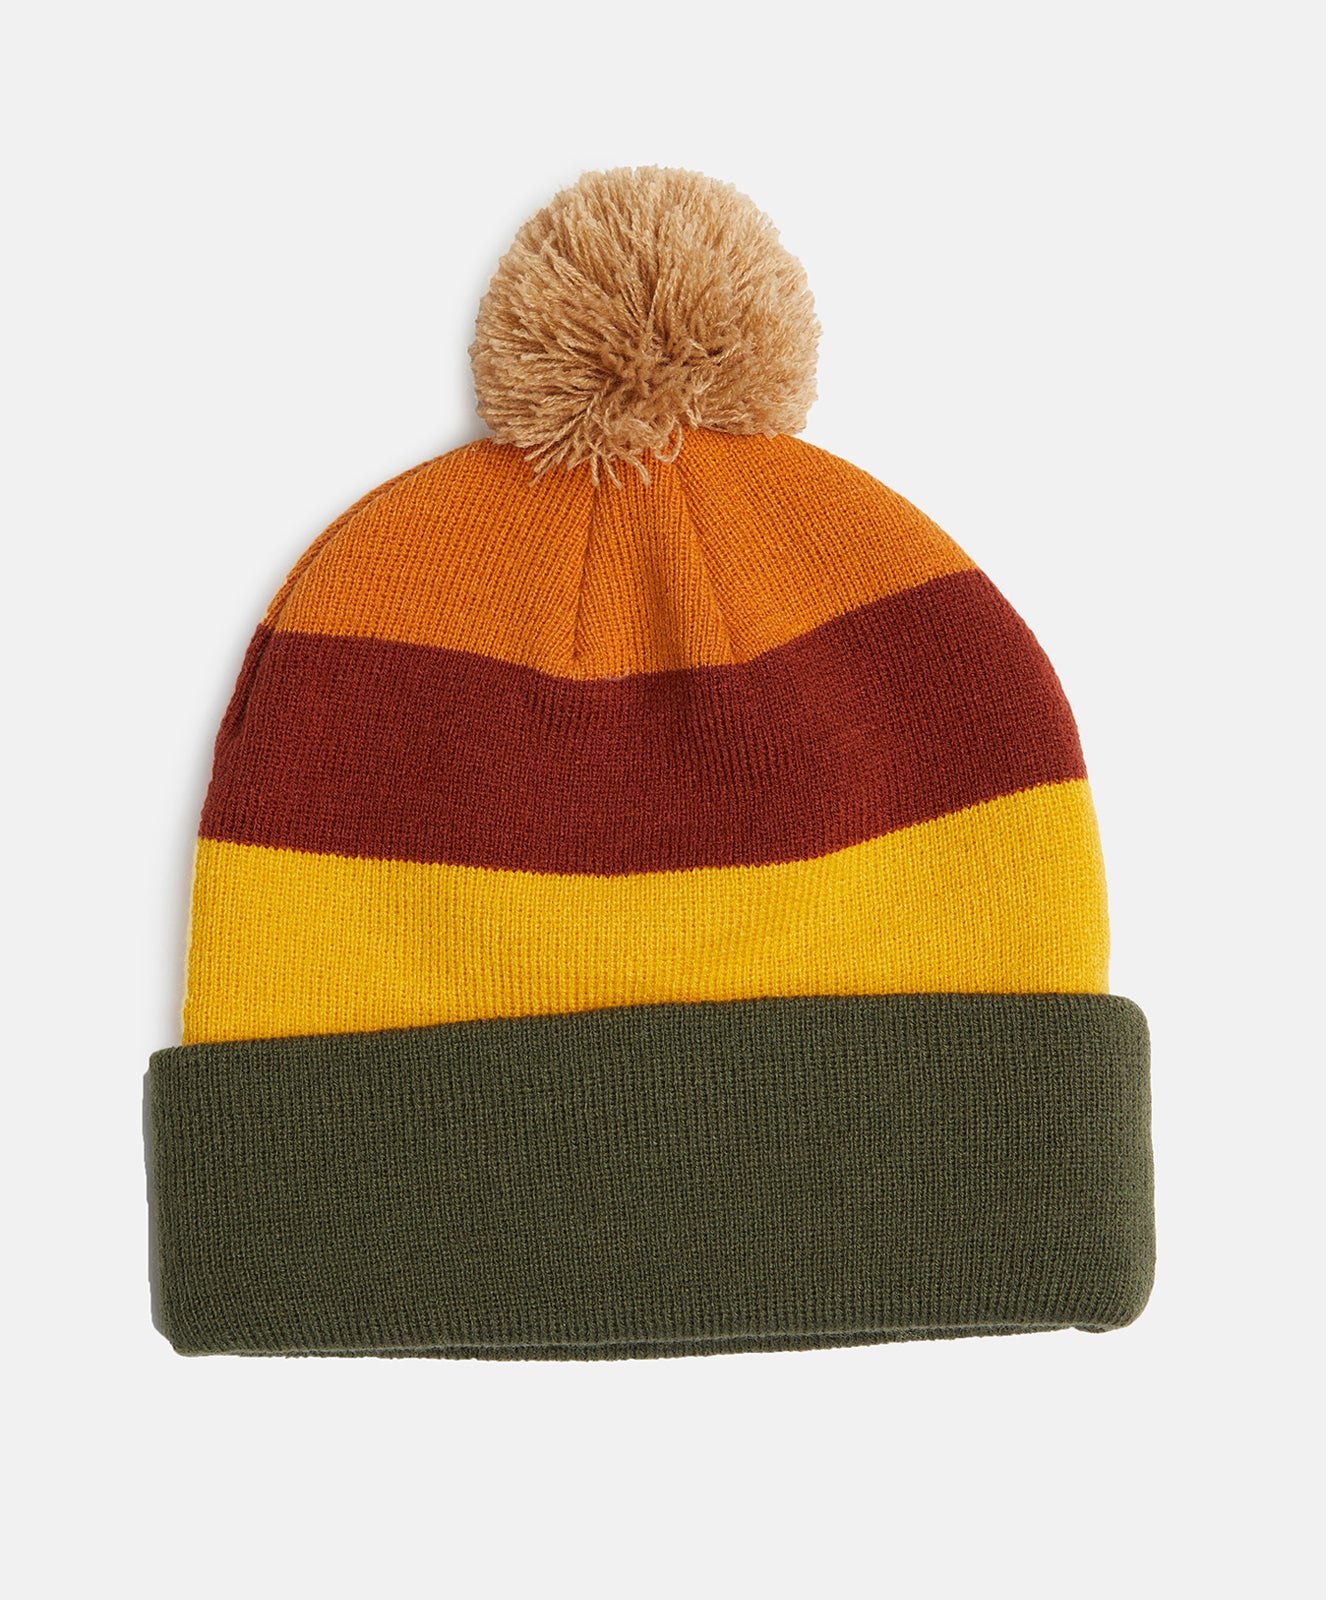 Our National Knit Beanie